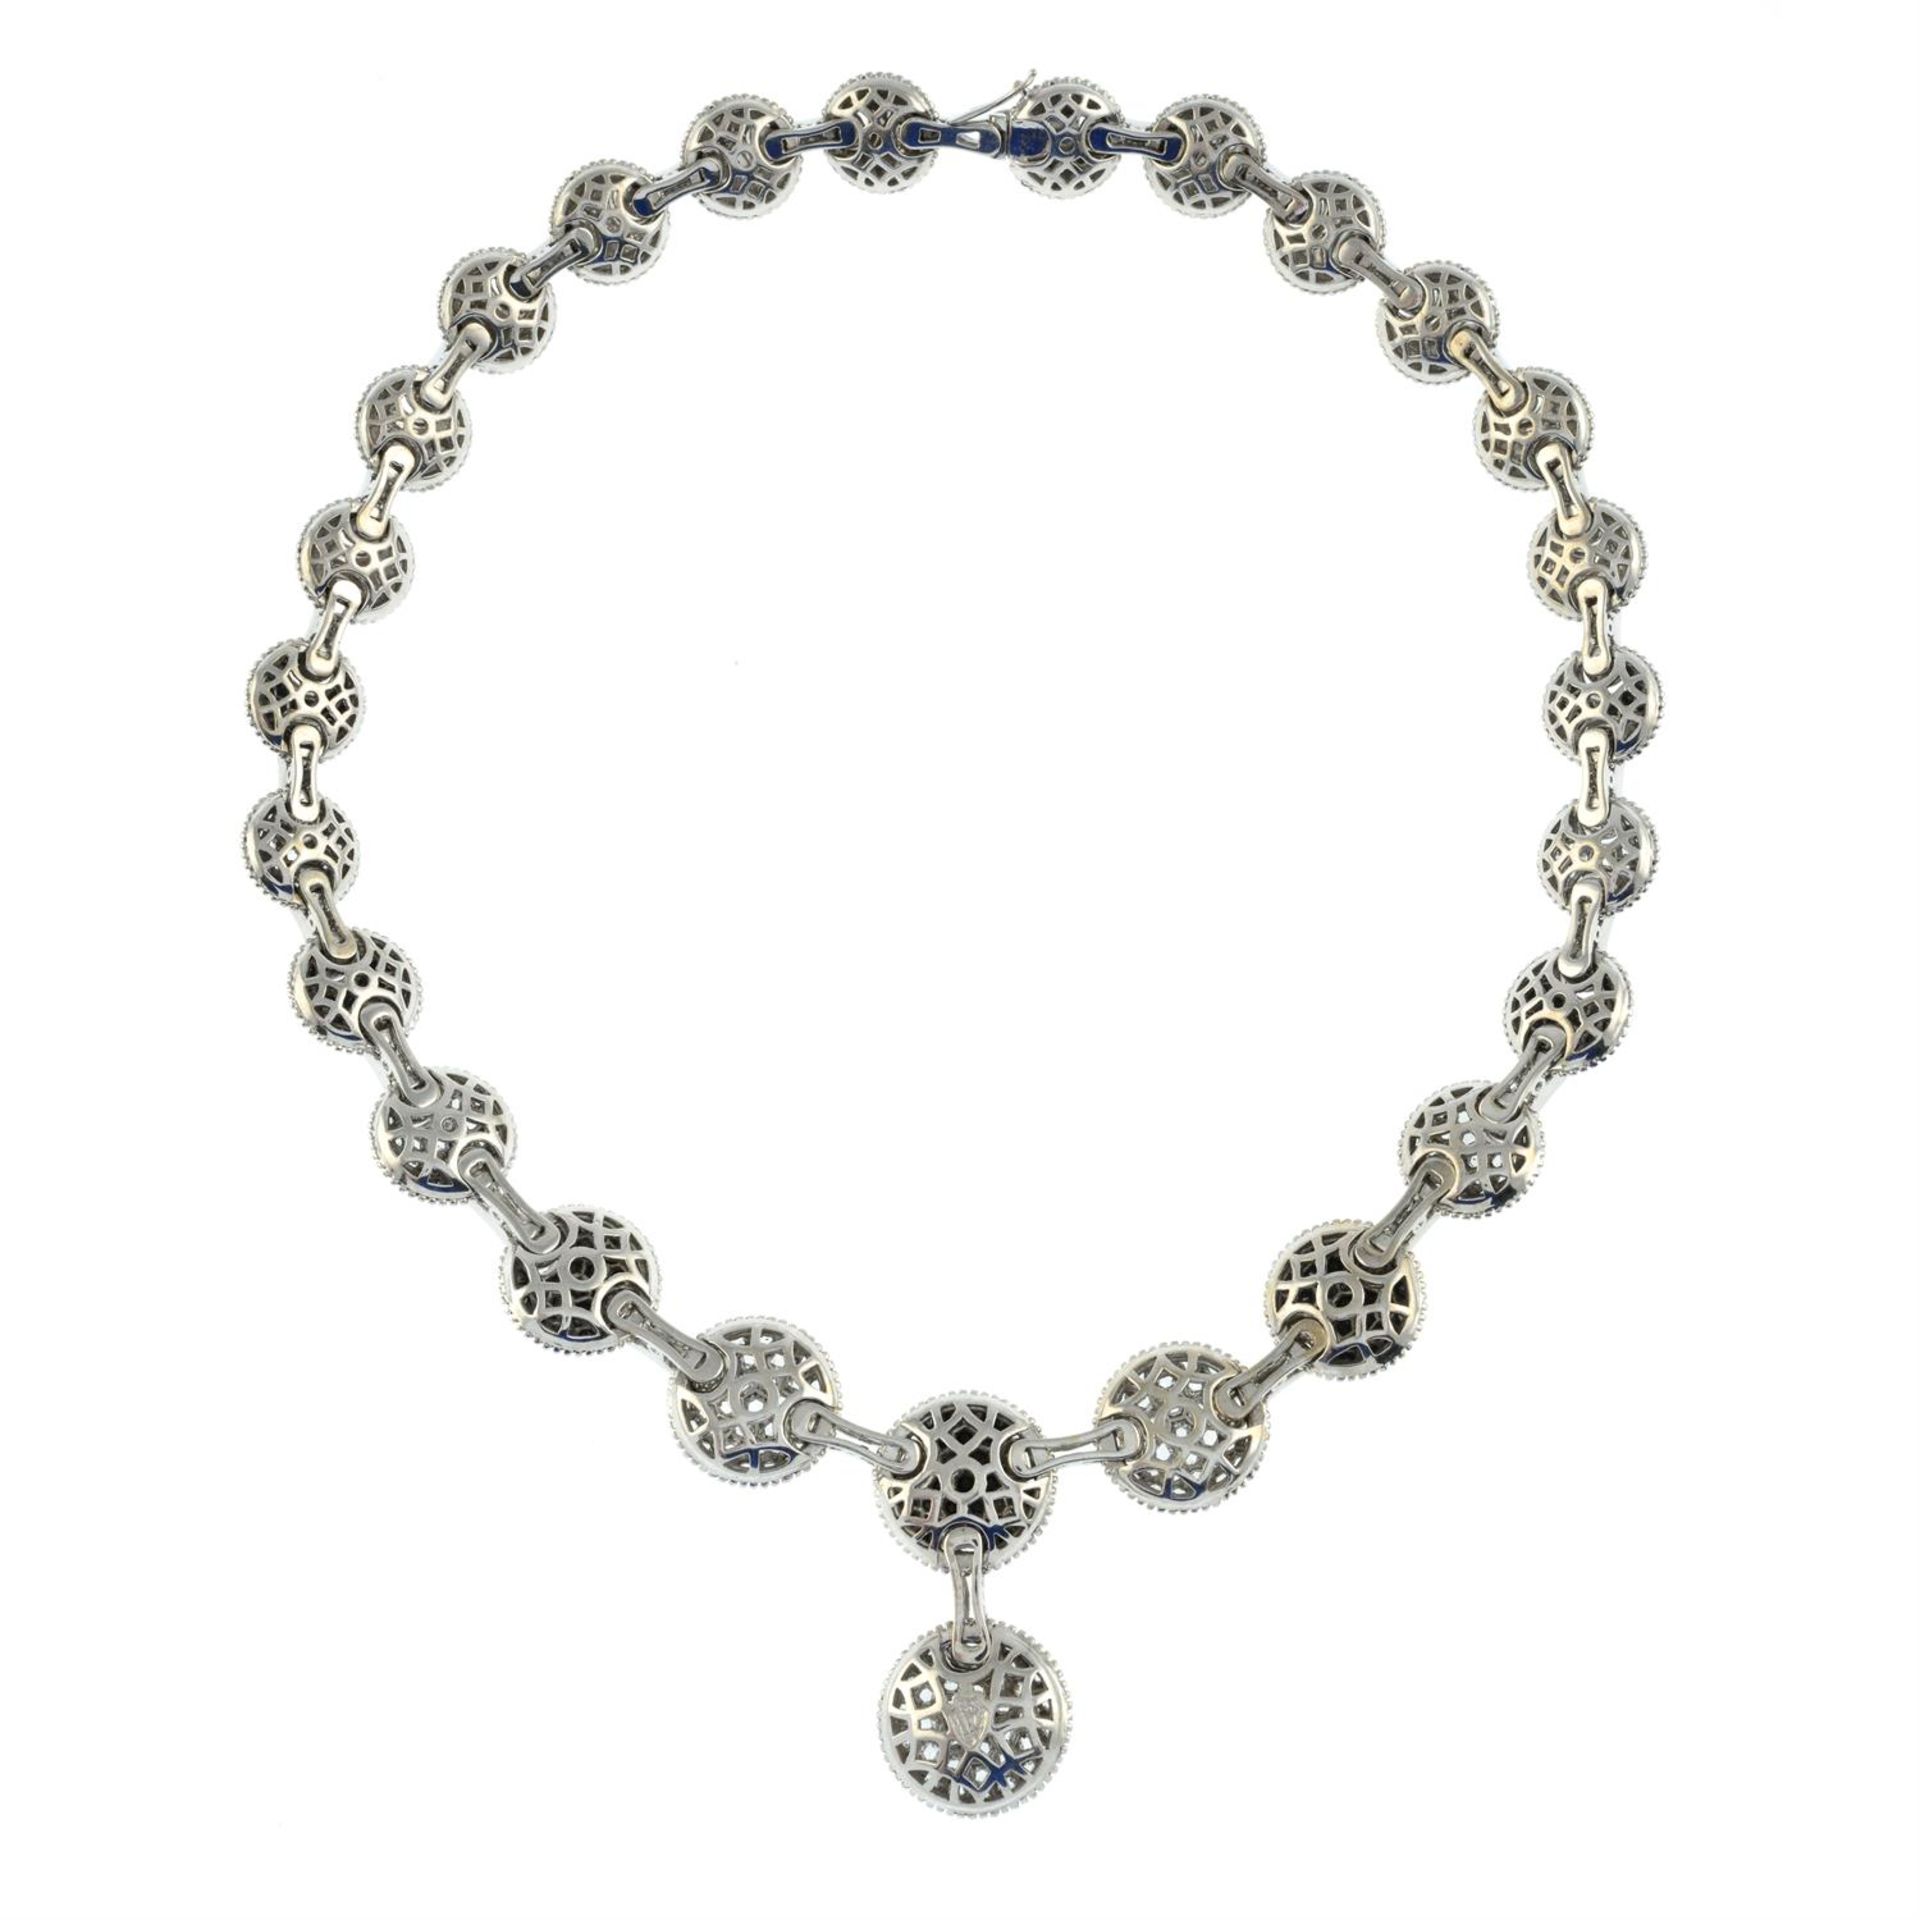 Diamond & gem necklace, by Mouawad - Image 4 of 4